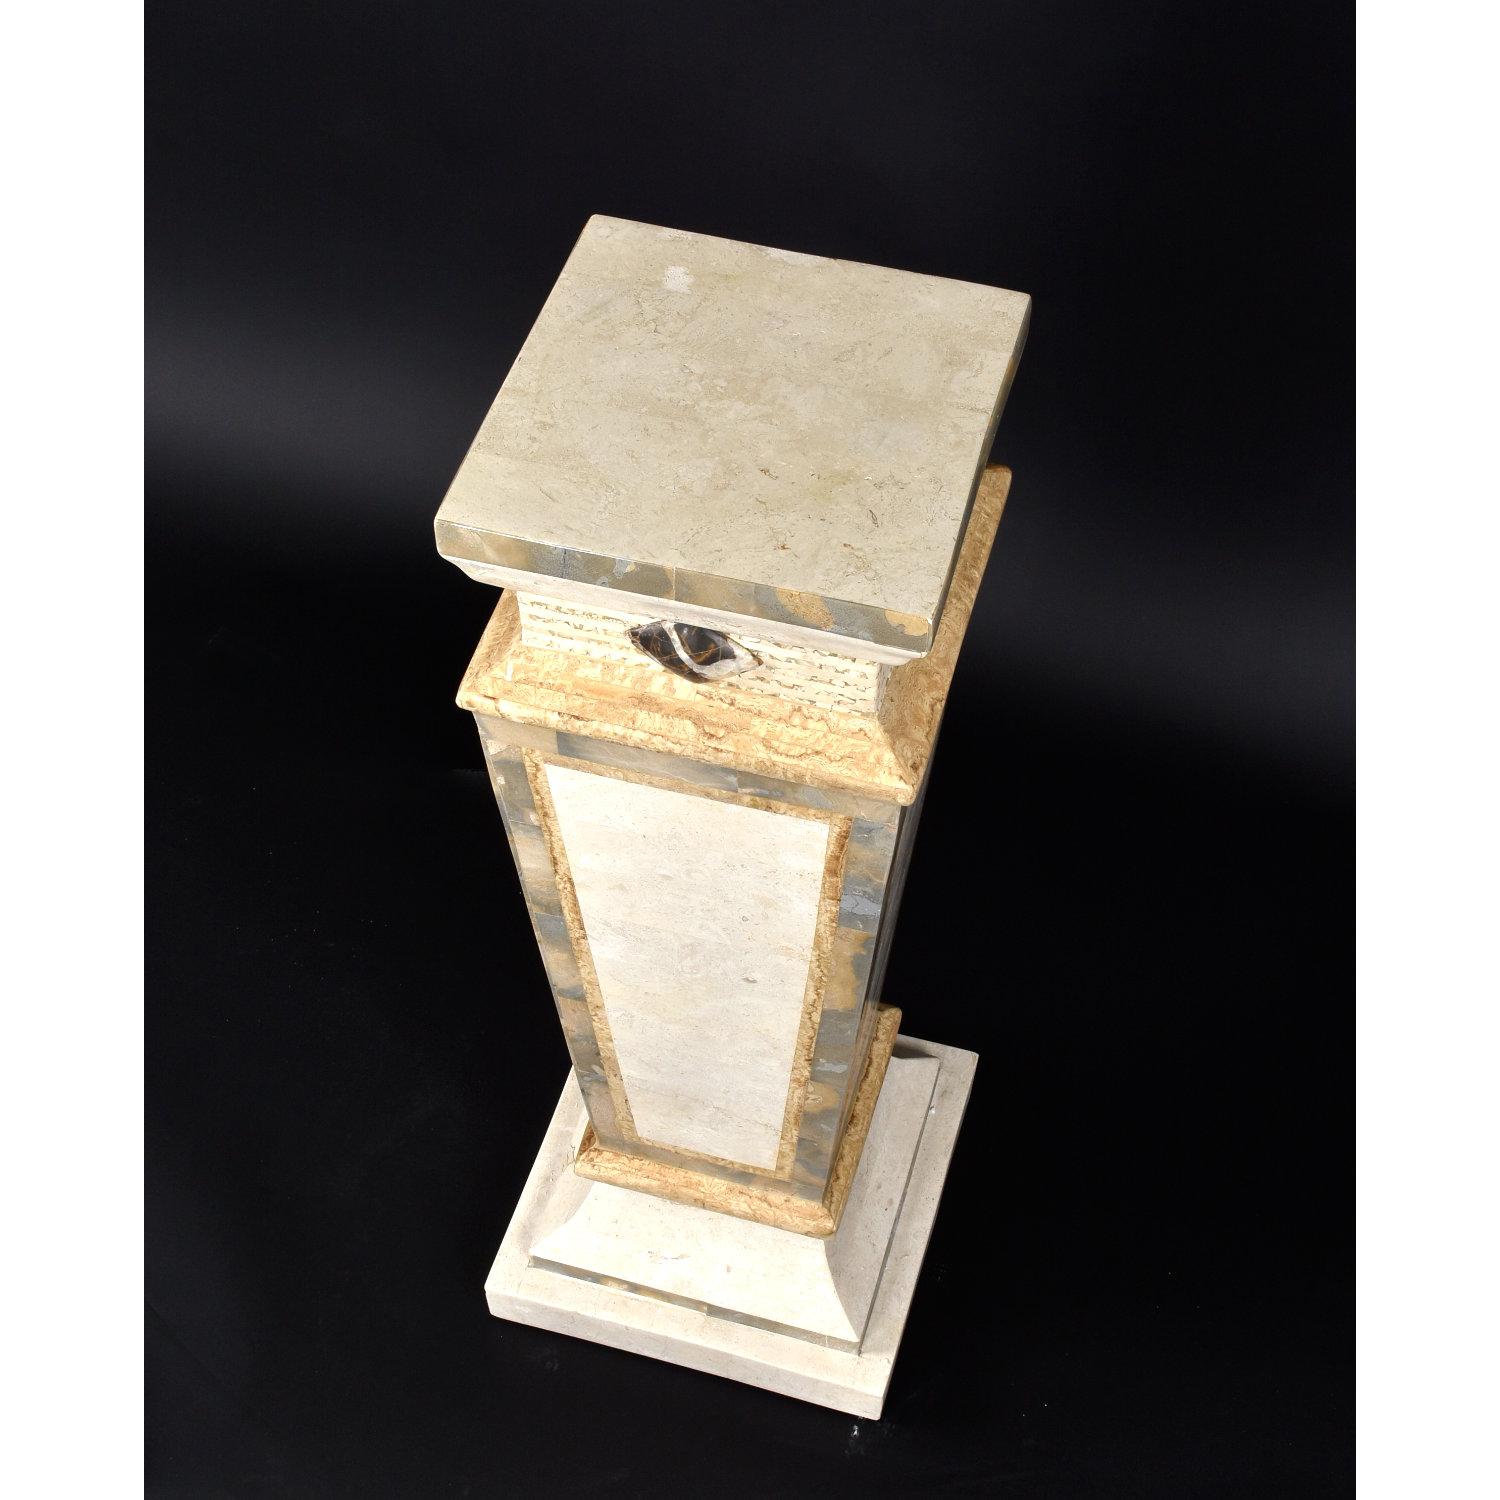 This listing is for the pedestal alone. The gold bust is sold separately.

Gorgeous Nineteen-Laties (1980s-1990s) era Maitland Smith tessellated stone display pedestal. The design is a Neo-Deco style with classical influenced form. The stone is